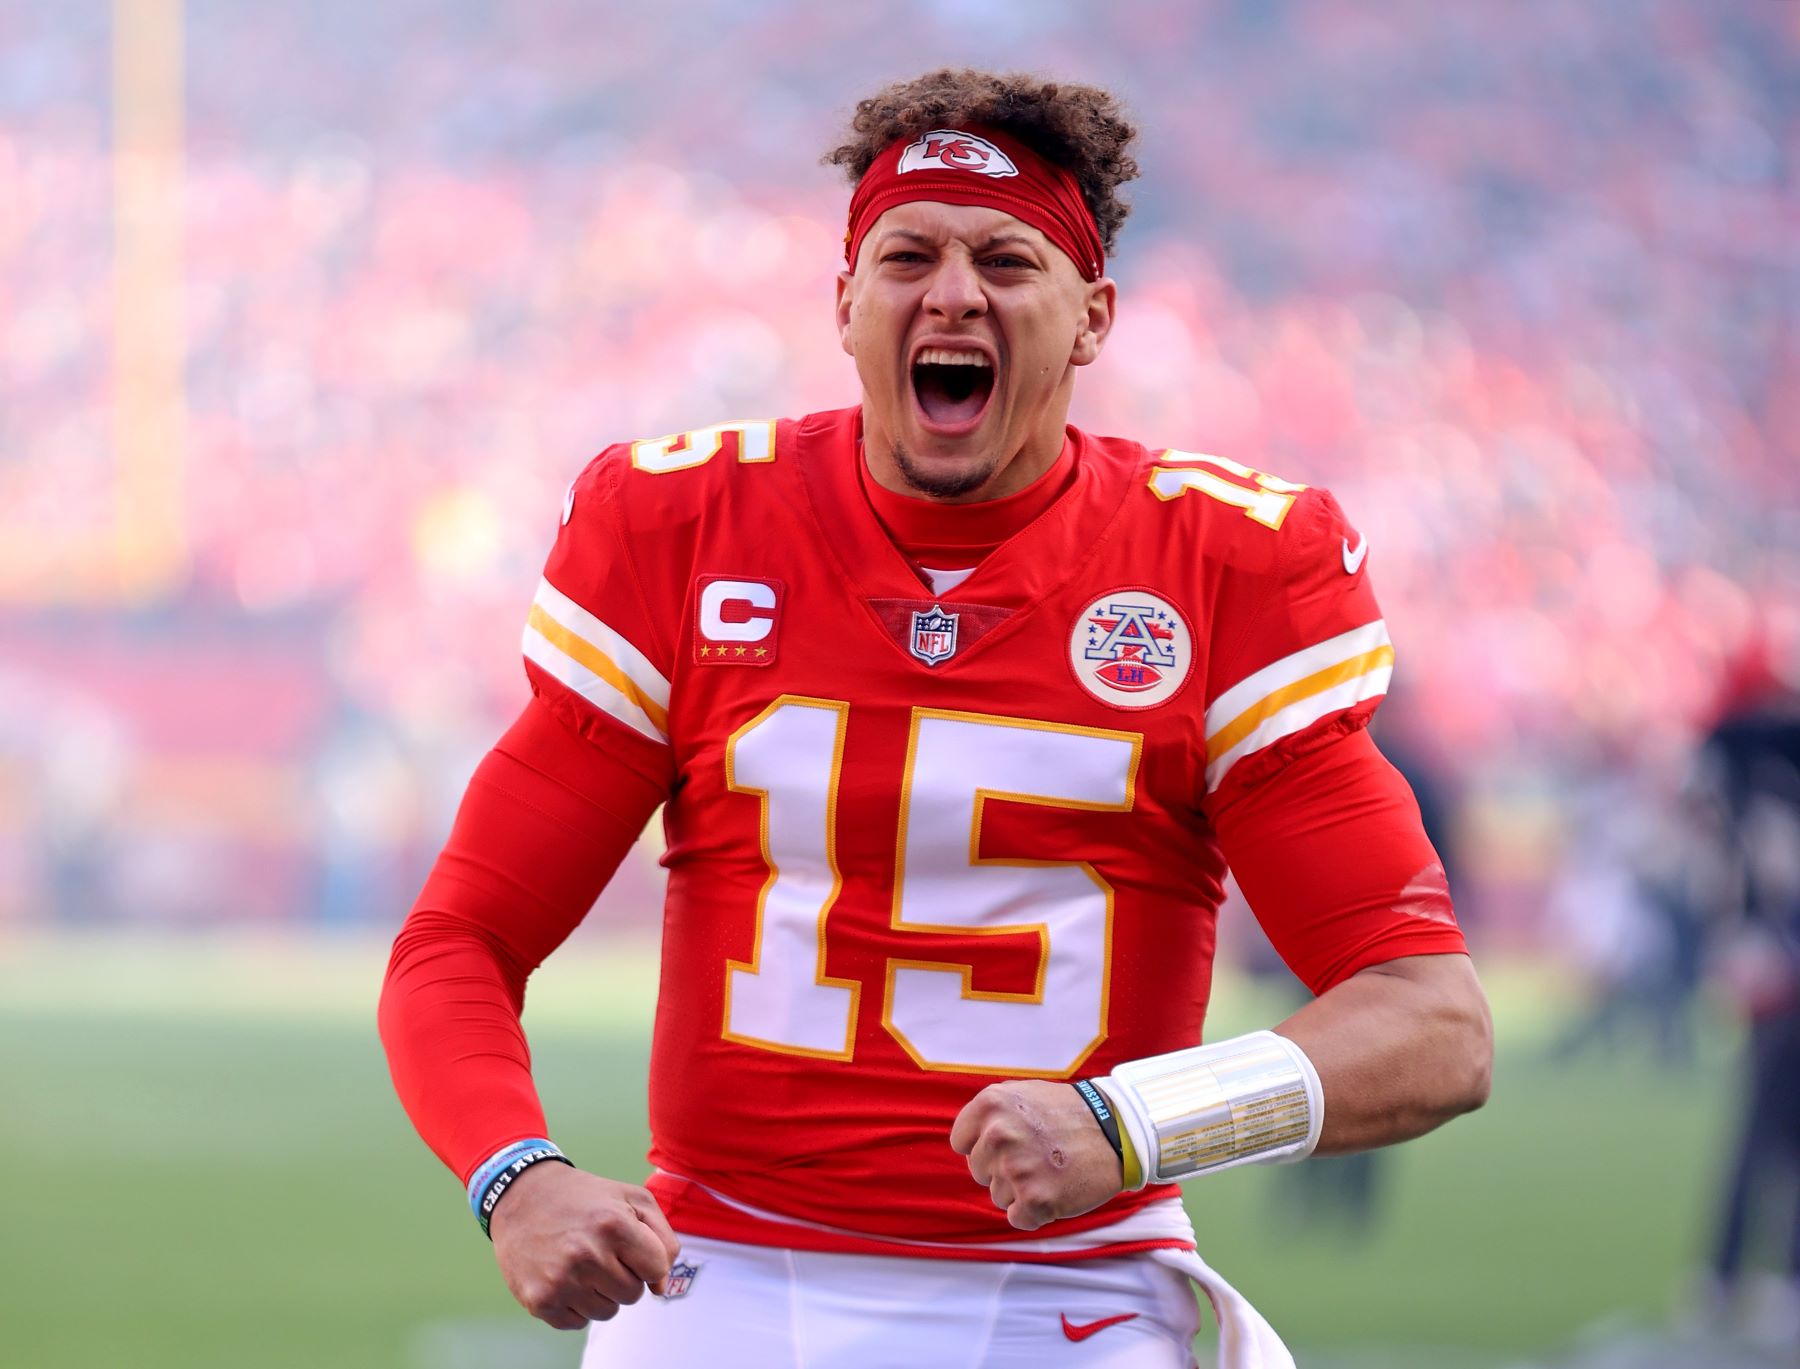 Quarterback Patrick Mahomes as #15 of the Kansas City Chiefs before the AFC Championship game against the Cincinnati Bengals